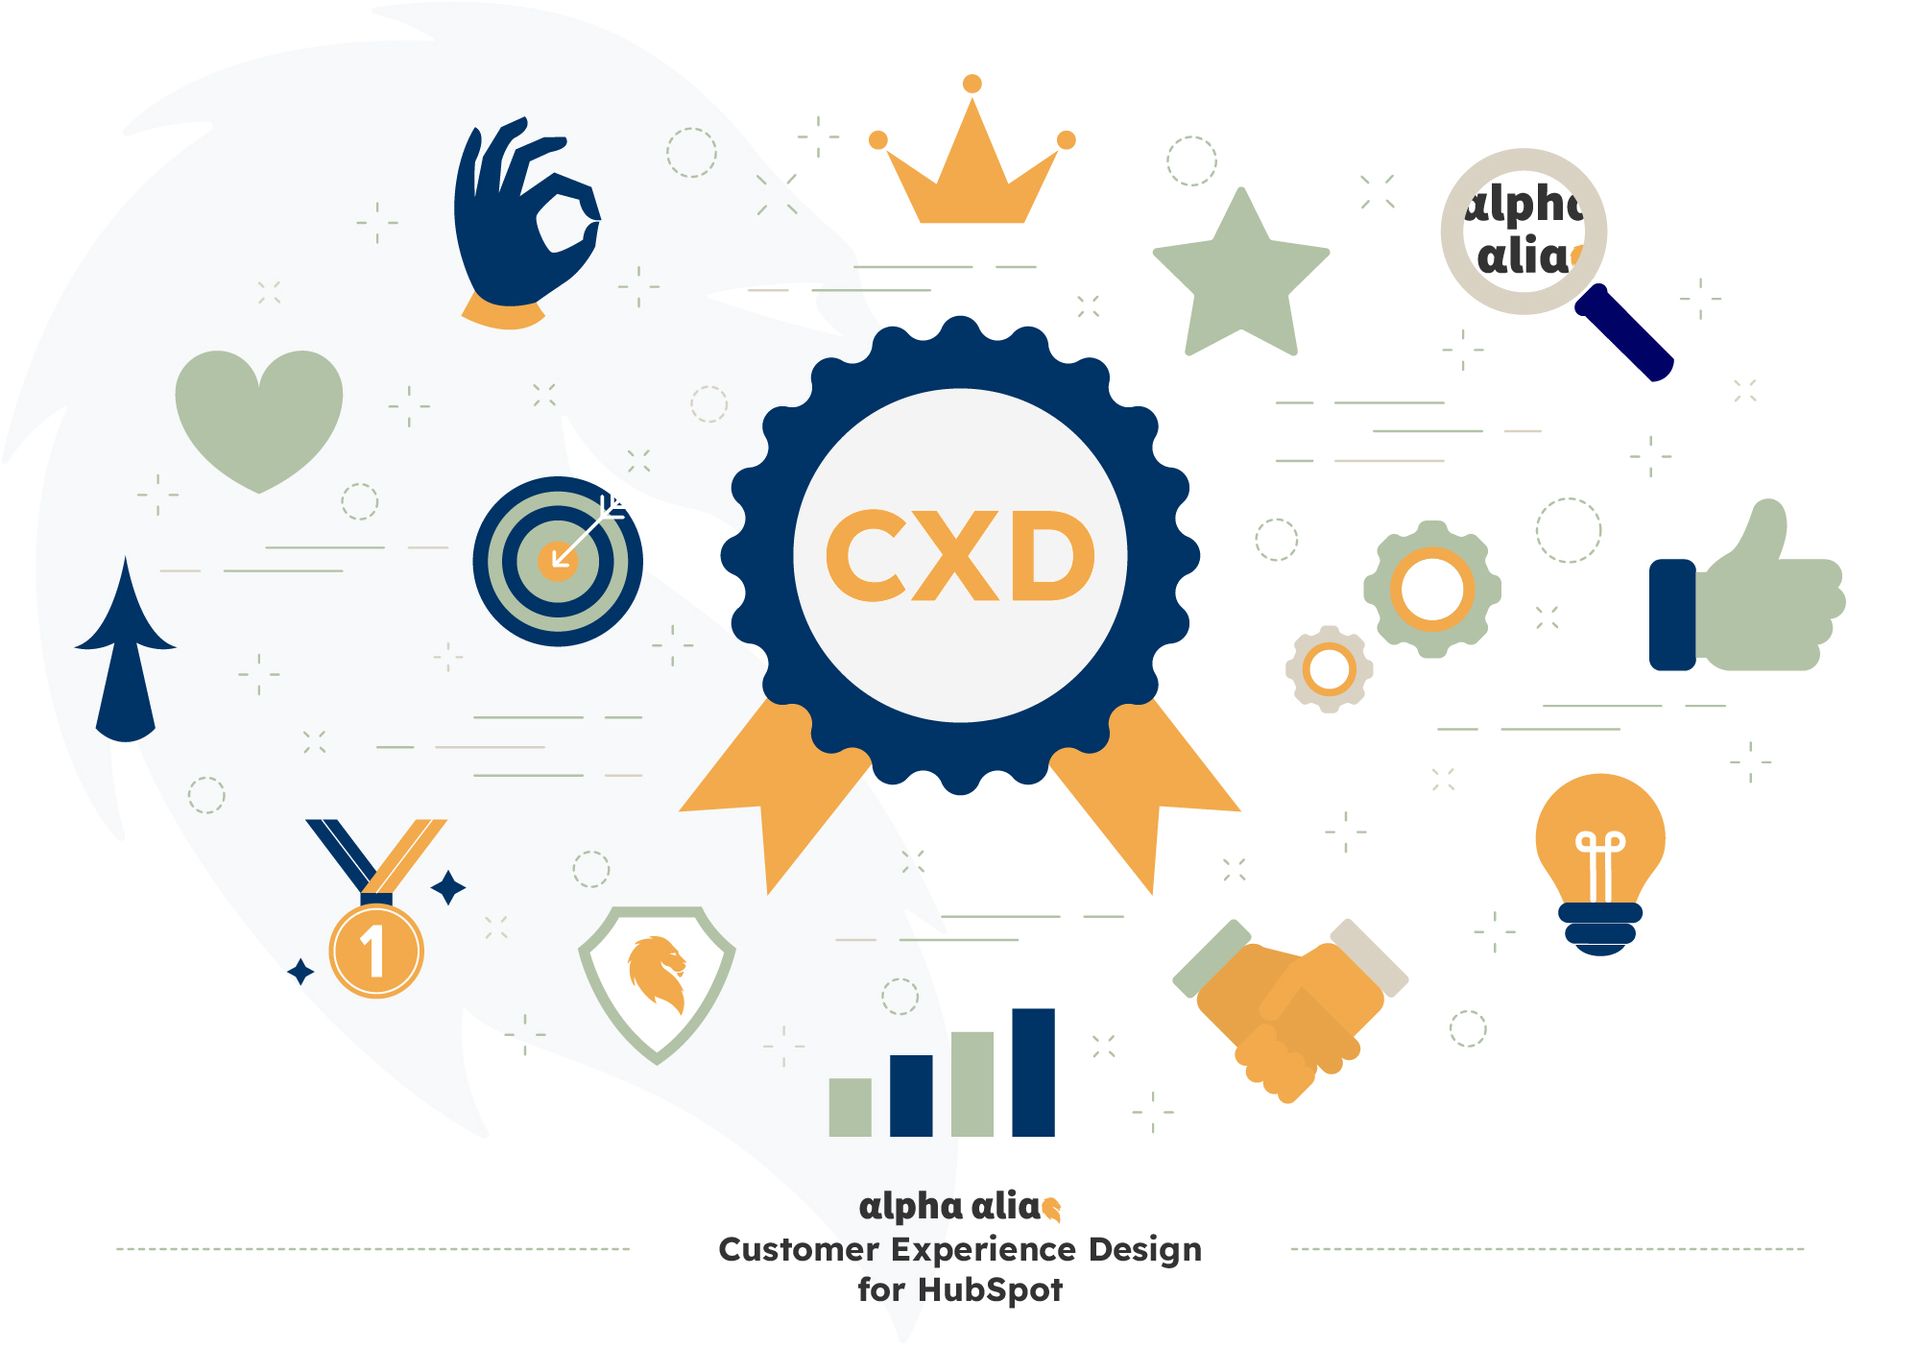 Customer Experience Design for HubSpot (pt2): Building and Enhancing Customer Experience Design for Business Growth